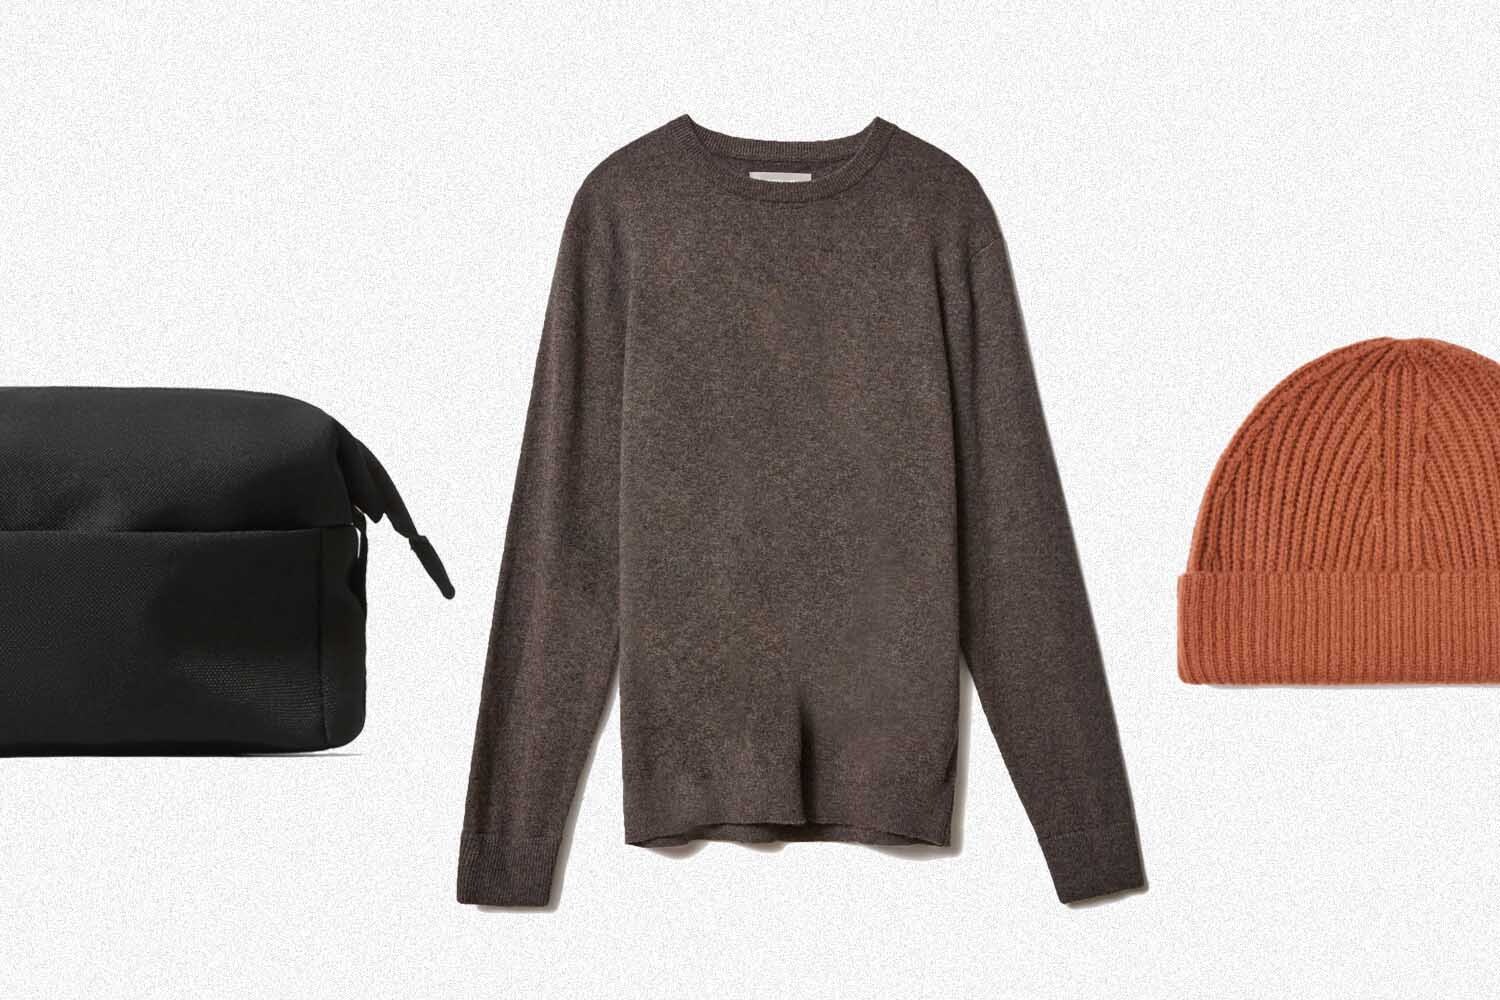 Deal: Shop Up to 40% Off at Everlane This Black Friday